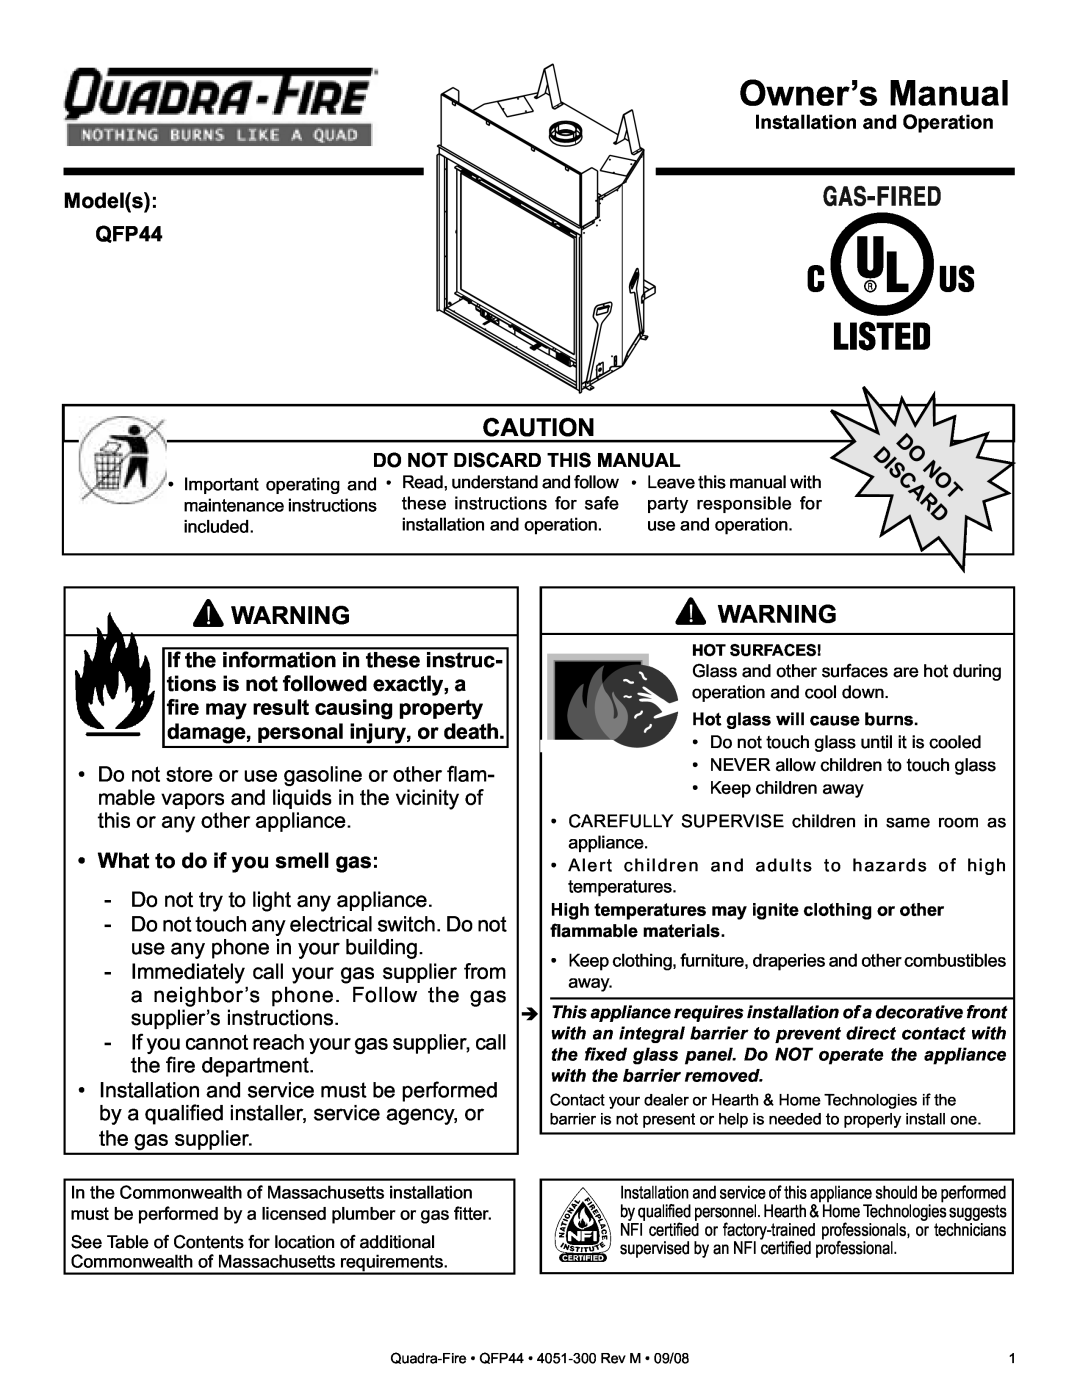 Quadra-Fire owner manual Models QFP44, What to do if you smell gas 